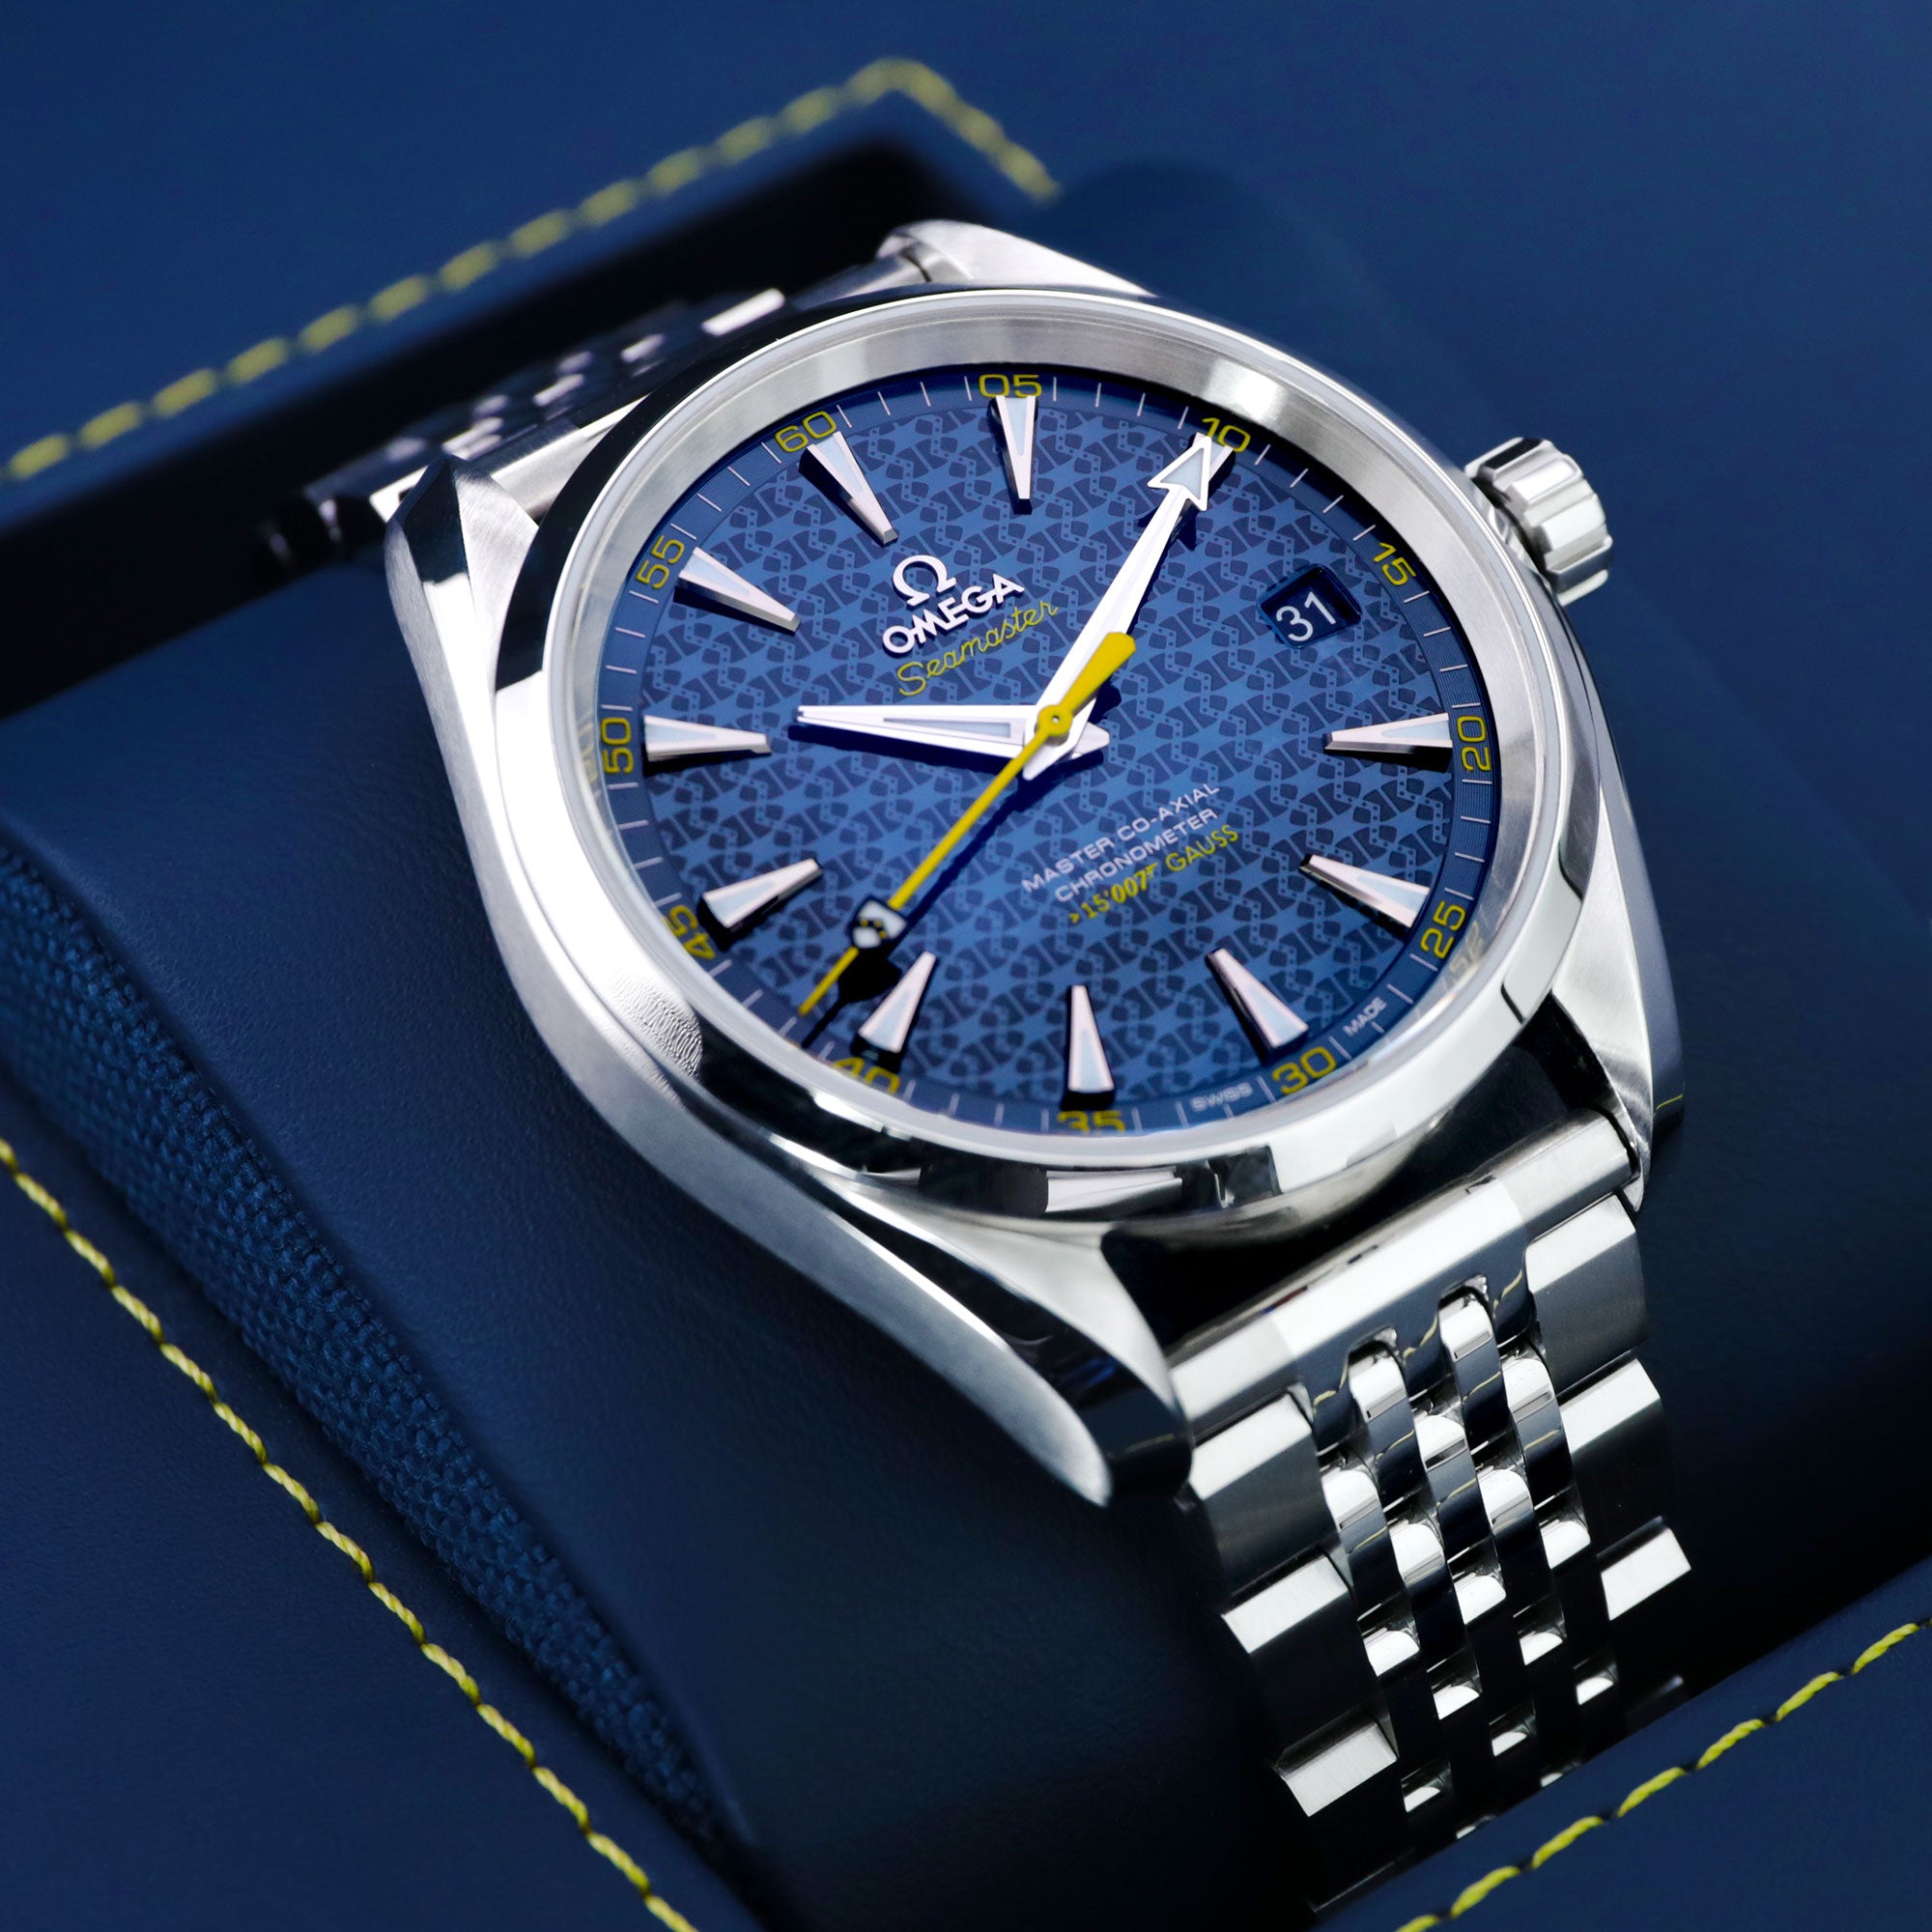 SPECTRE in 2015, Omega Aqua Terra 231.10.42.21.03.004 is a limited edition watch from the Omega Seamaster James Bond series.